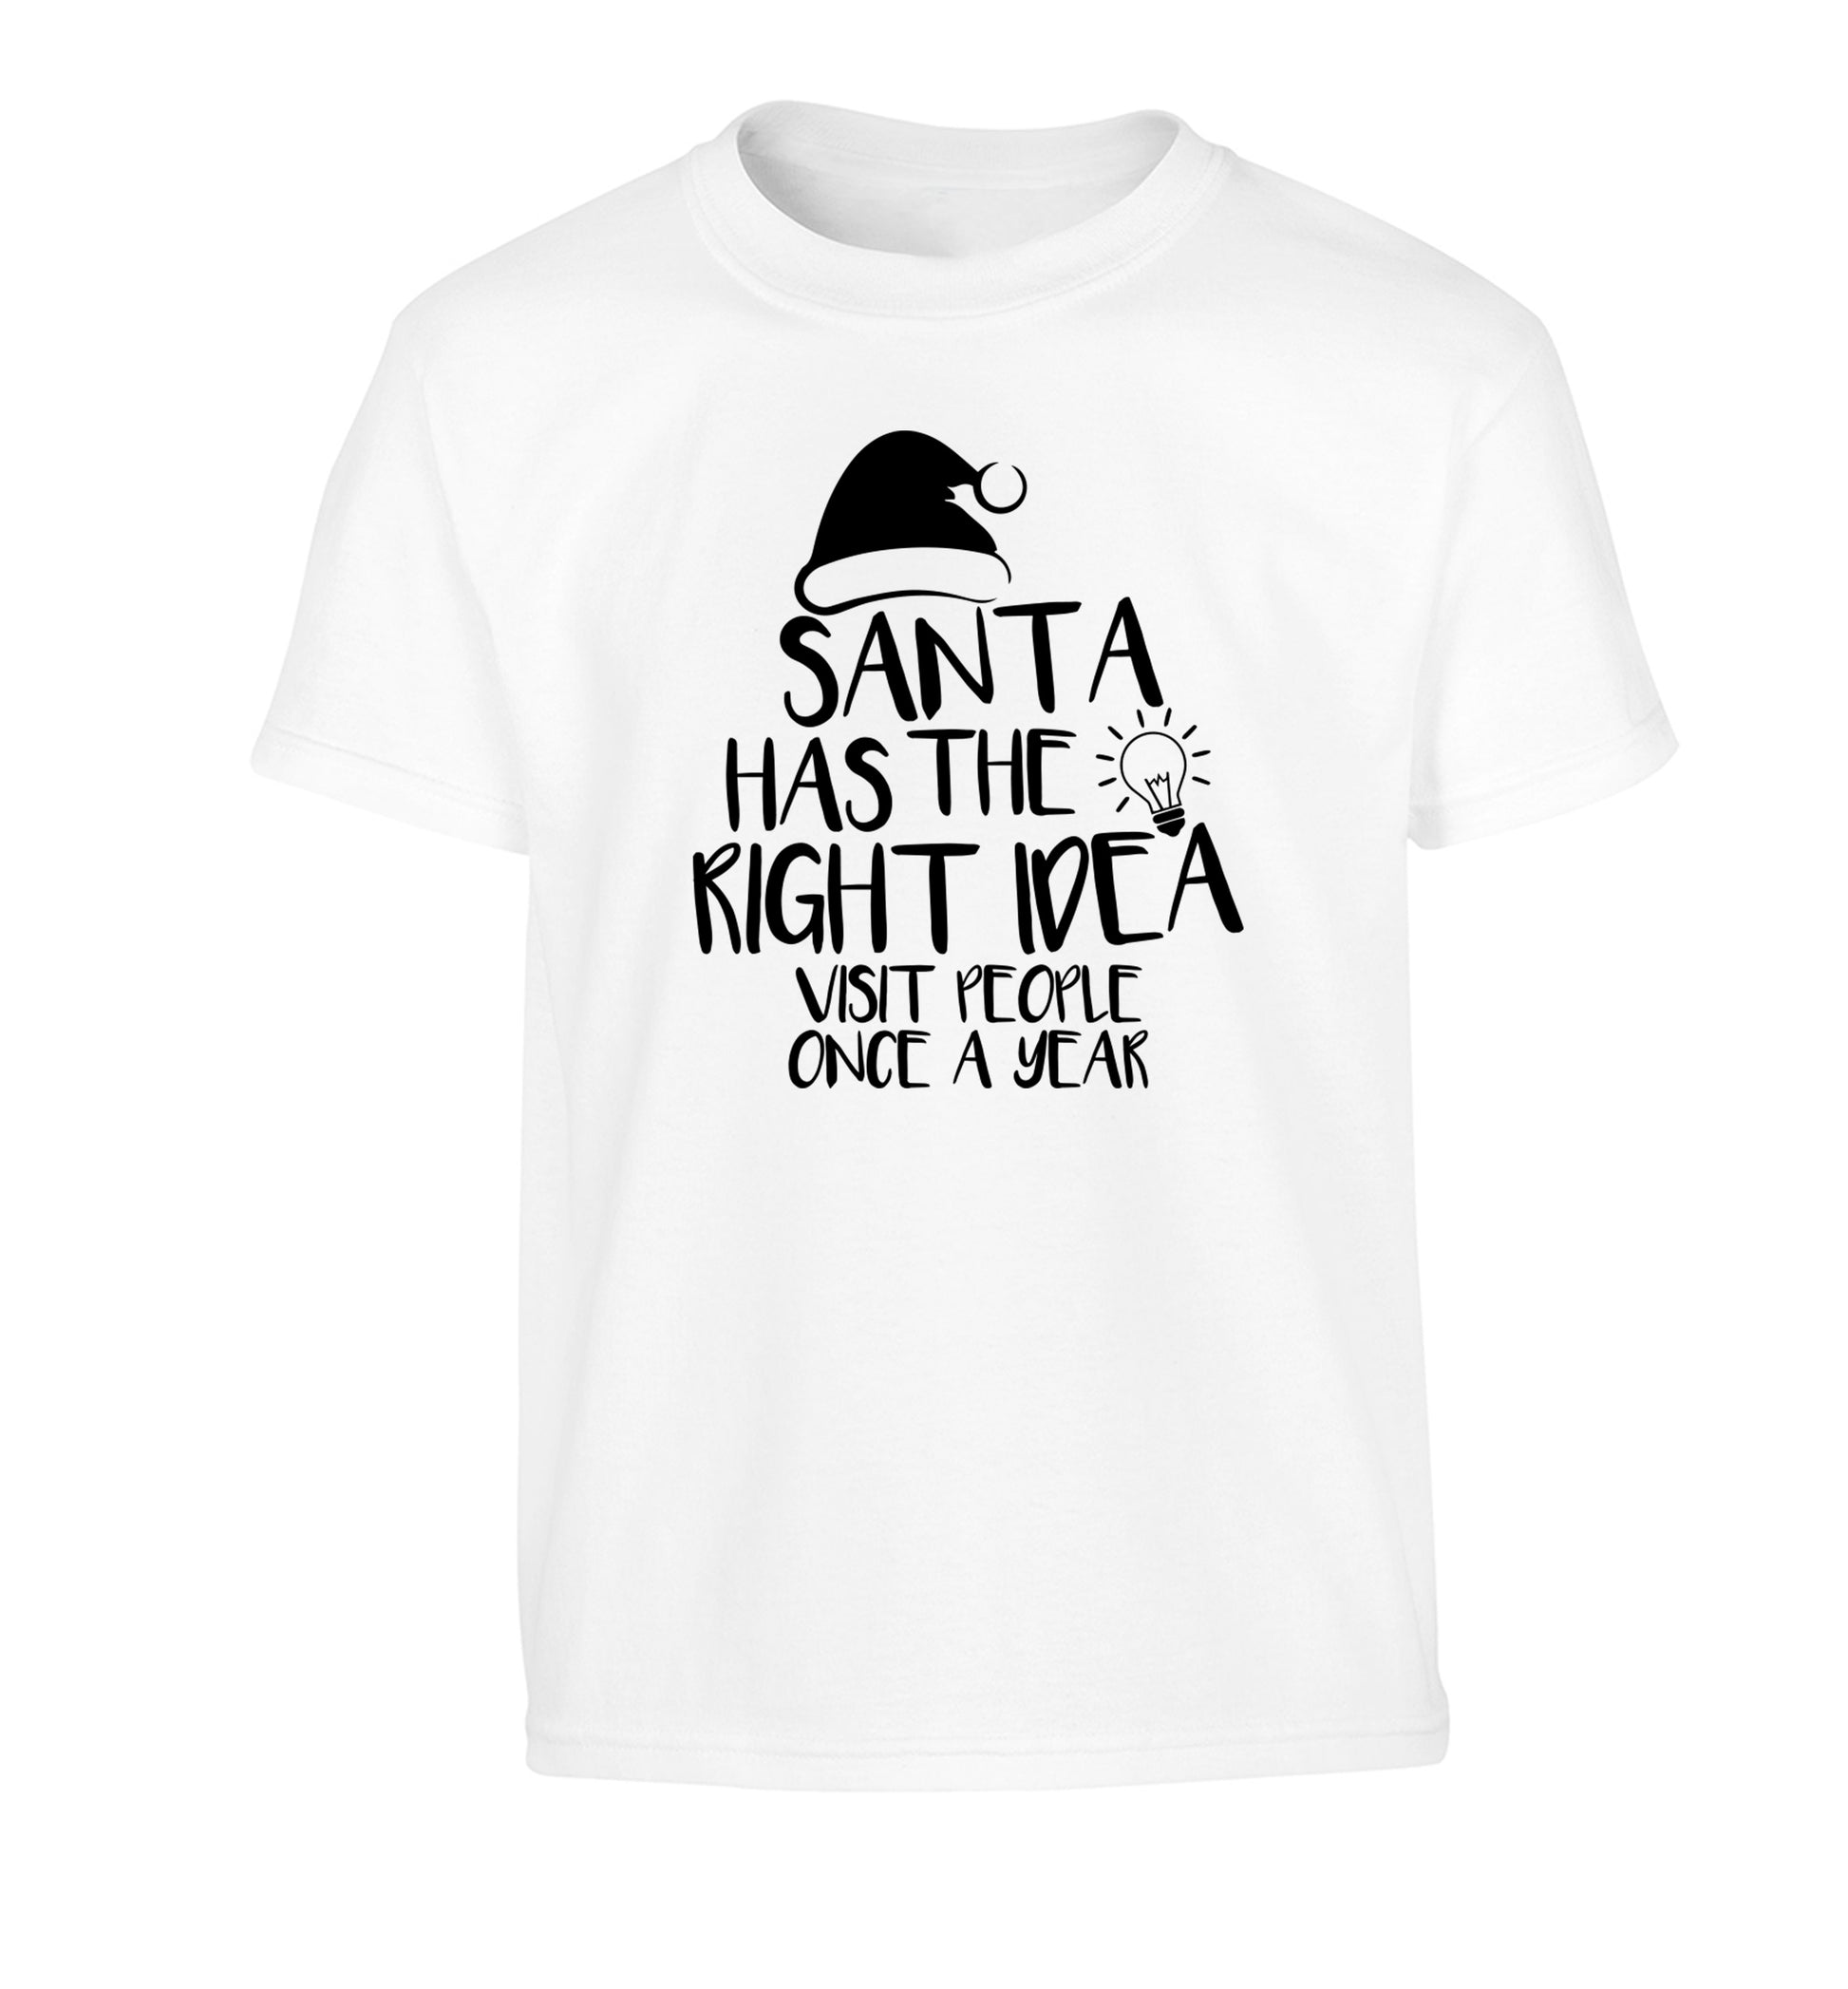 Santa has the right idea visit people once a year Children's white Tshirt 12-14 Years